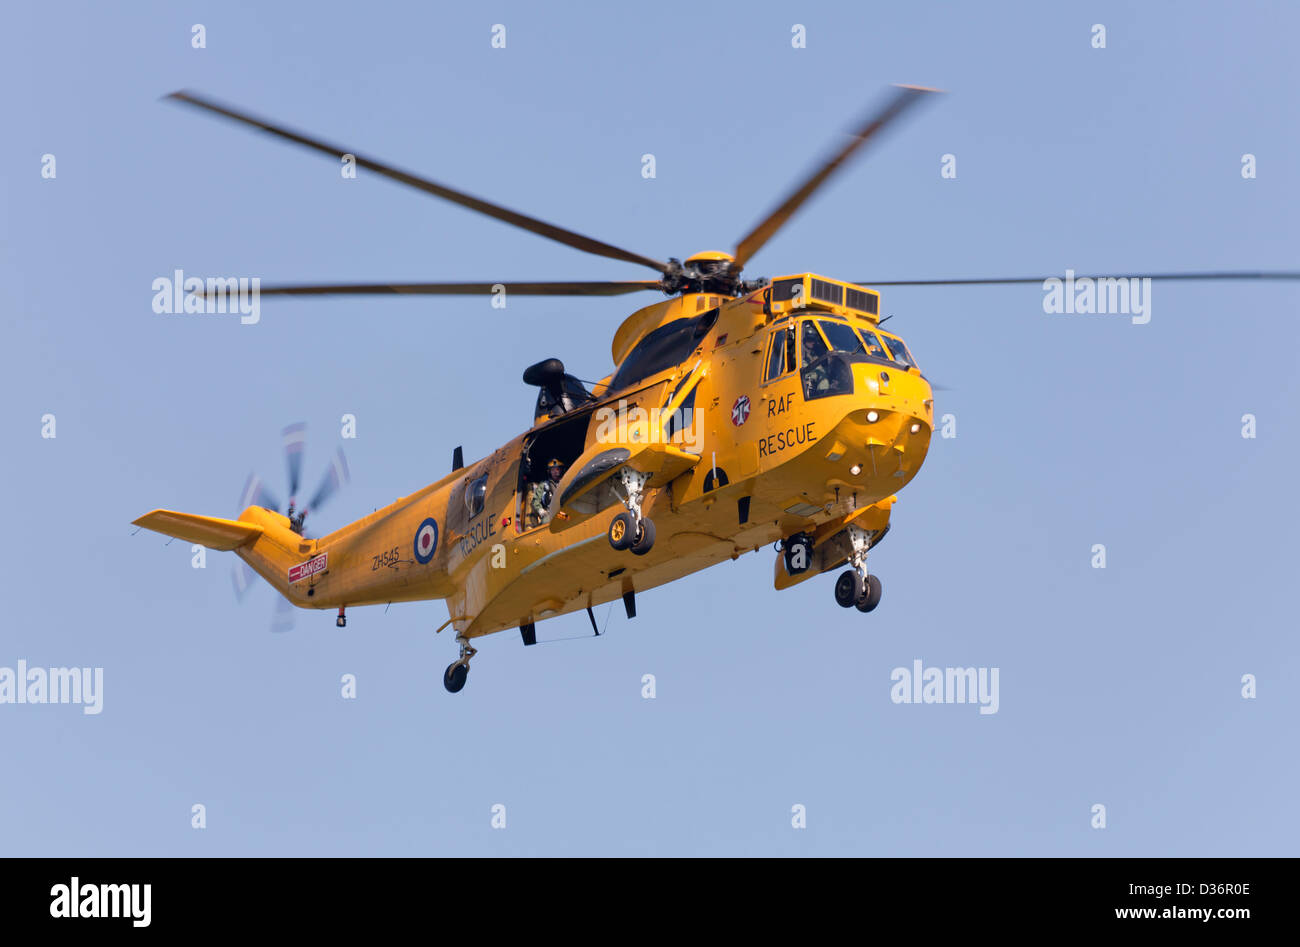 RAF Sea king search and rescue helicopter. Stock Photo